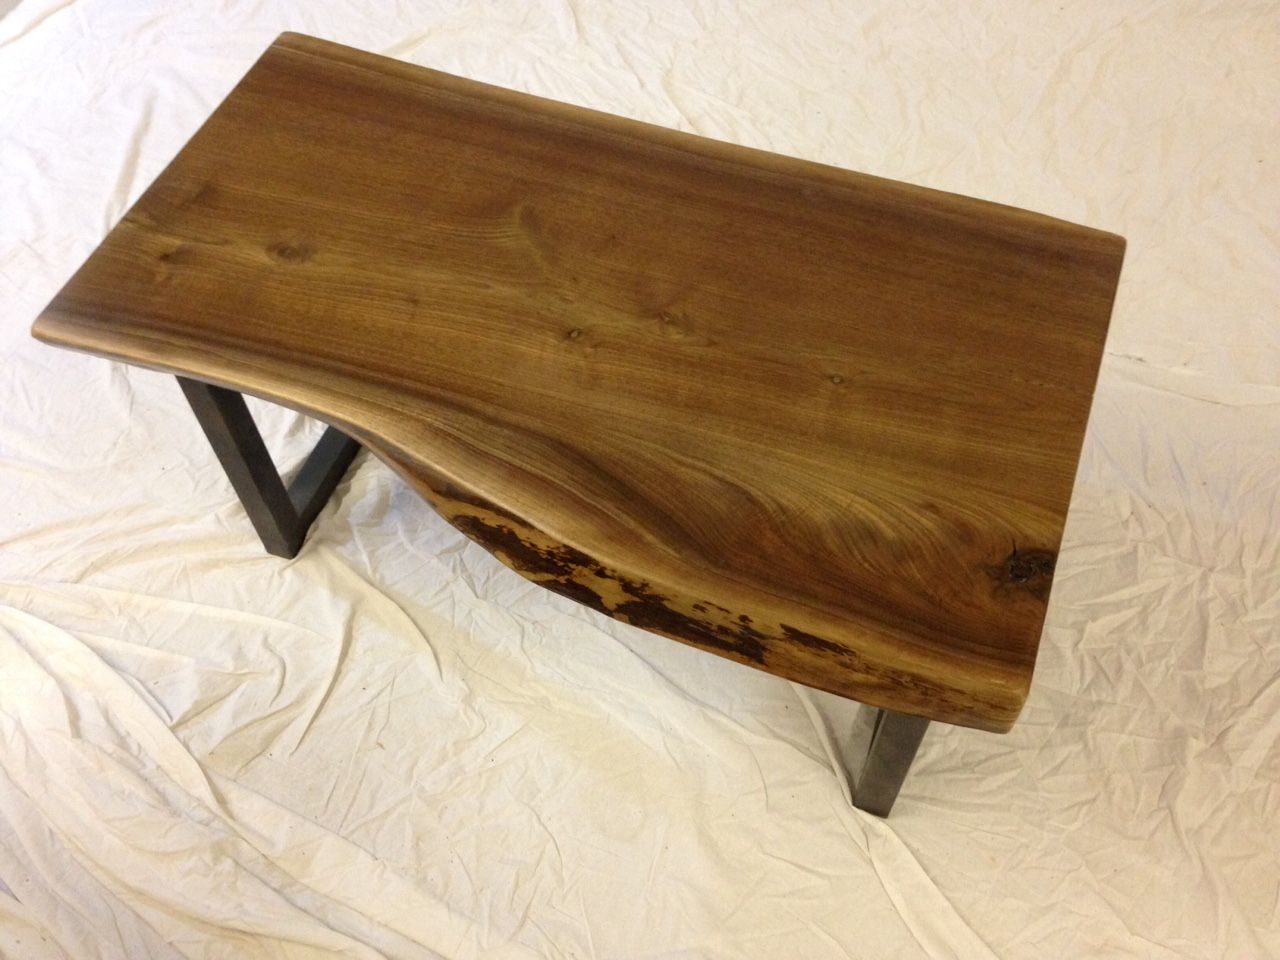 Live Edge Black Walnut Slab Coffee Table (item #41) With Hand Finished Walnut Coffee Tables (View 11 of 15)